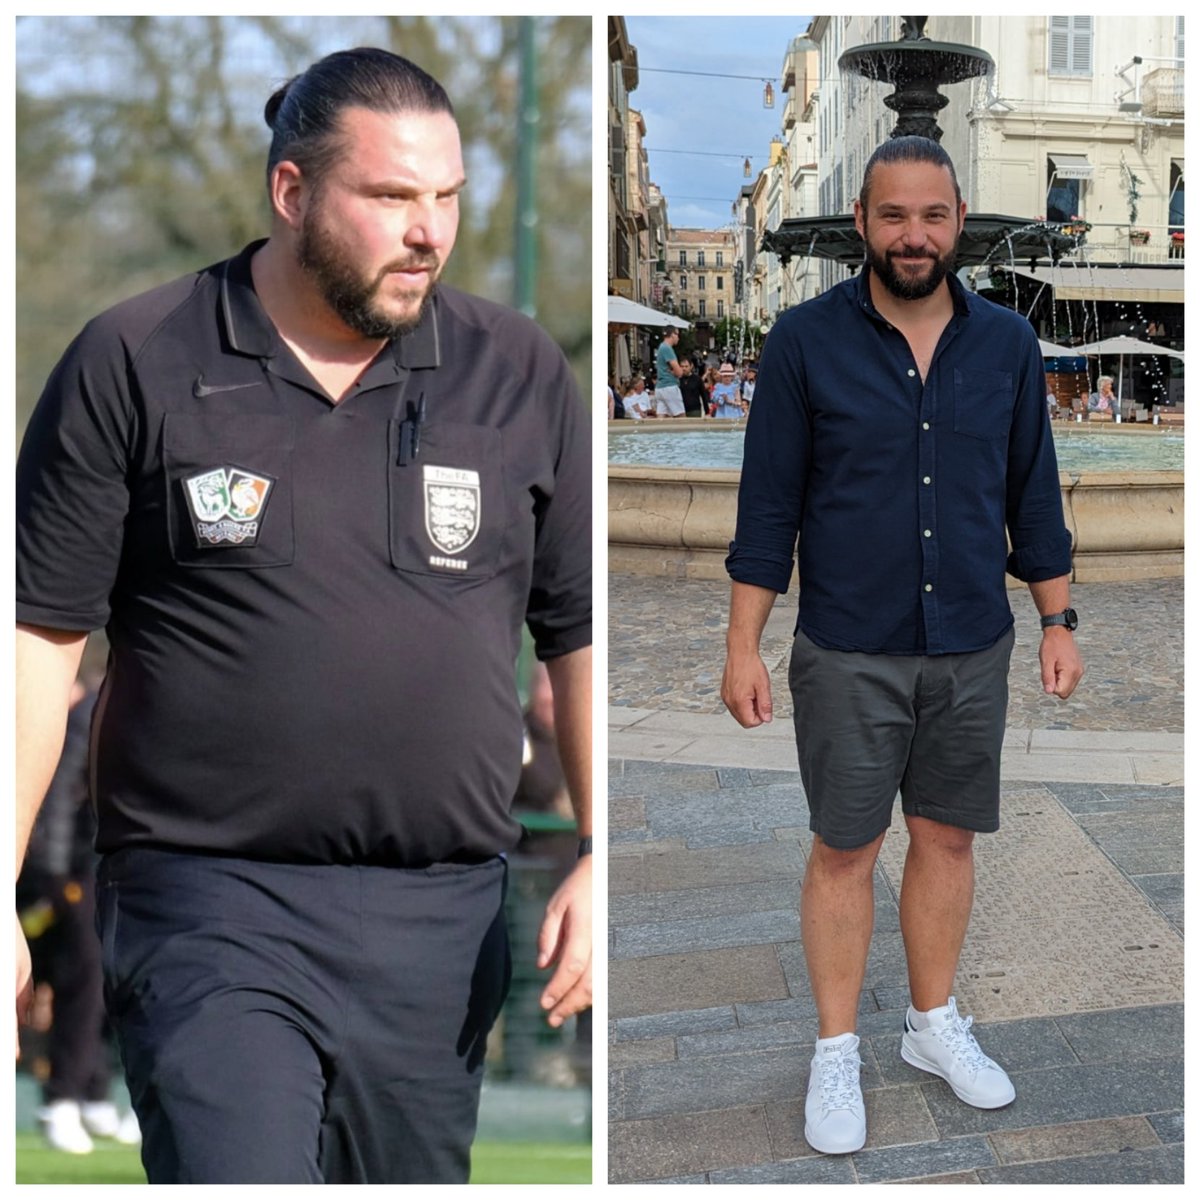 What a difference a few months of constant effort can make. On the left 134kg in February. On the right 98kg last weekend. Cannot wait for this season to start!

@andrewbatt5 need an 'after' picture in my kit next season if possible!! 

#referee
#weightlosstransformation